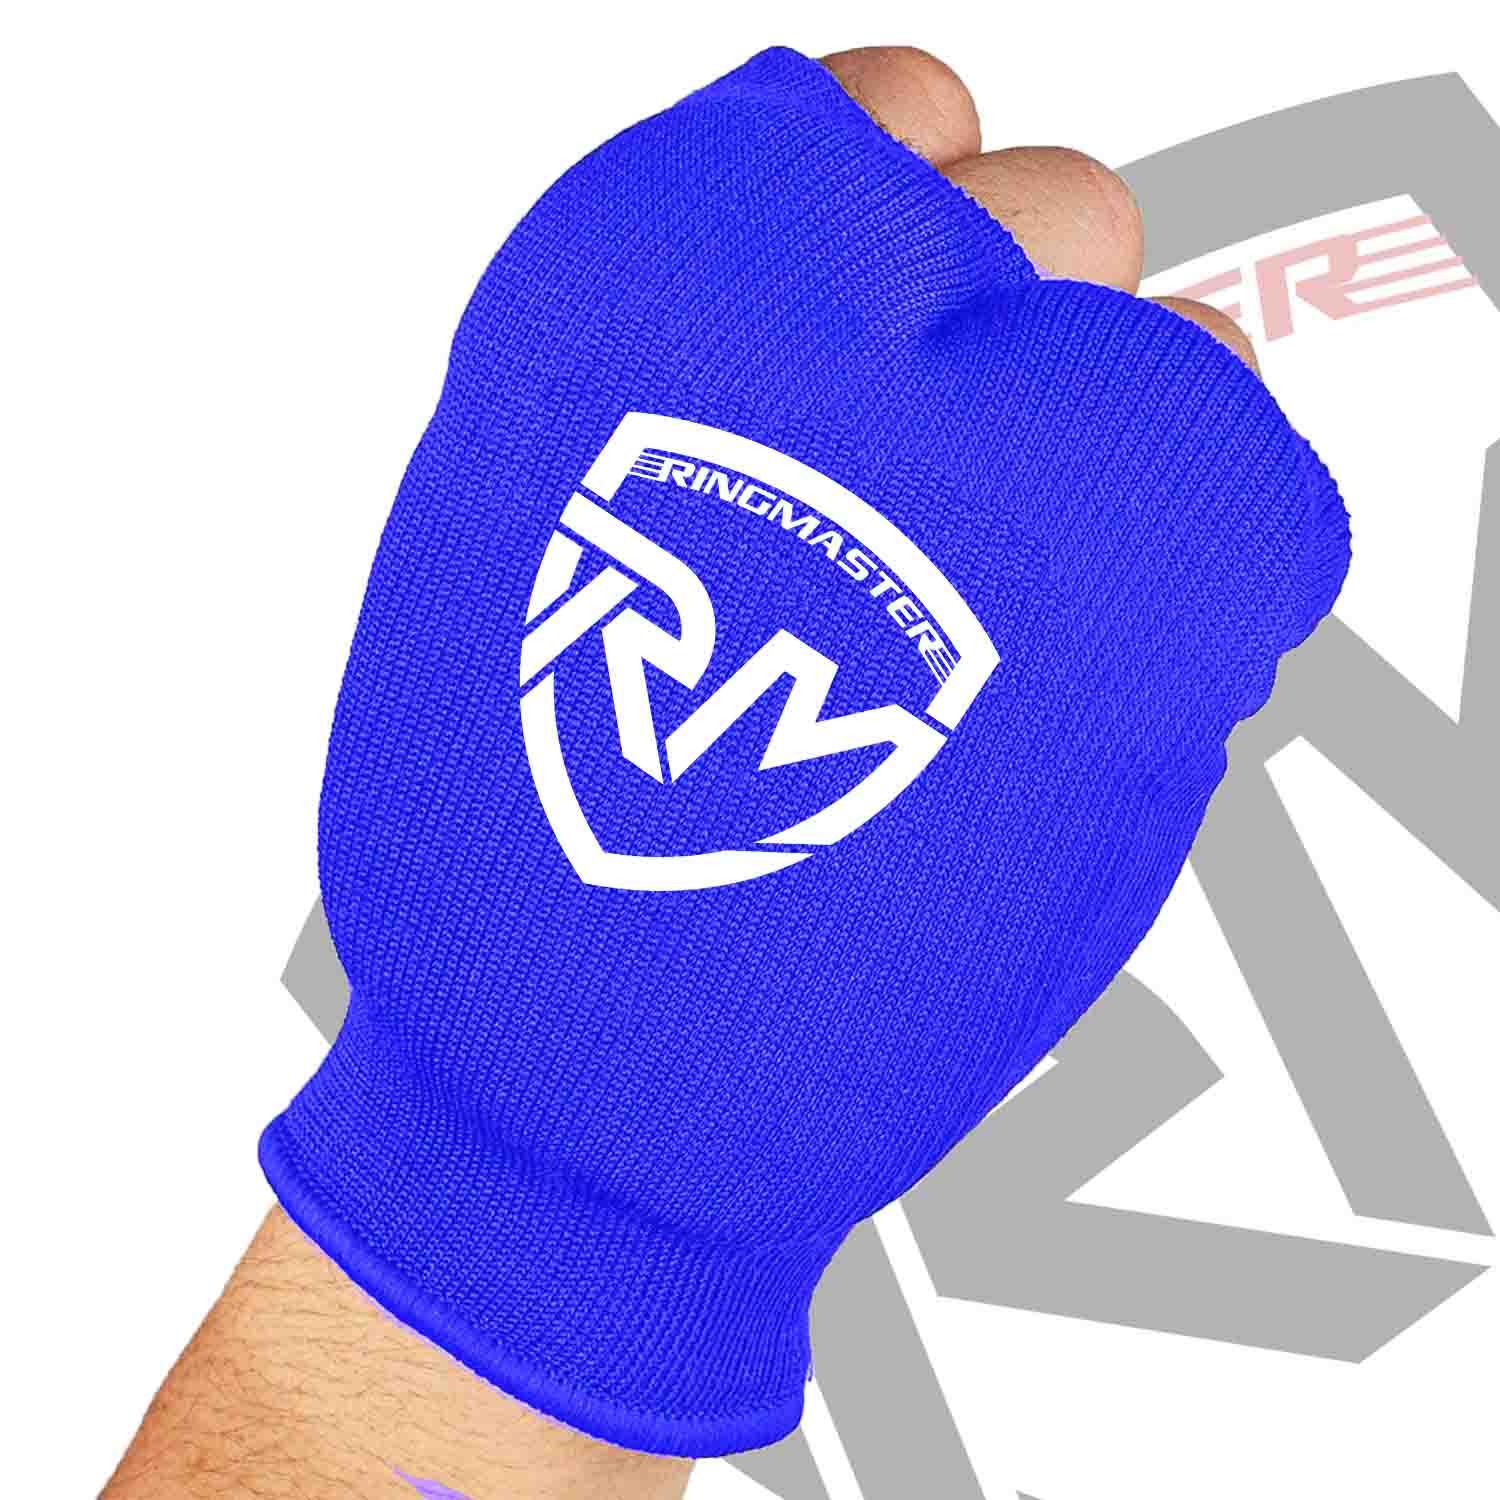 RingMaster Sports Slip on Elastic Hand Pads Mitts Blue - RINGMASTER SPORTS - Made For Champions